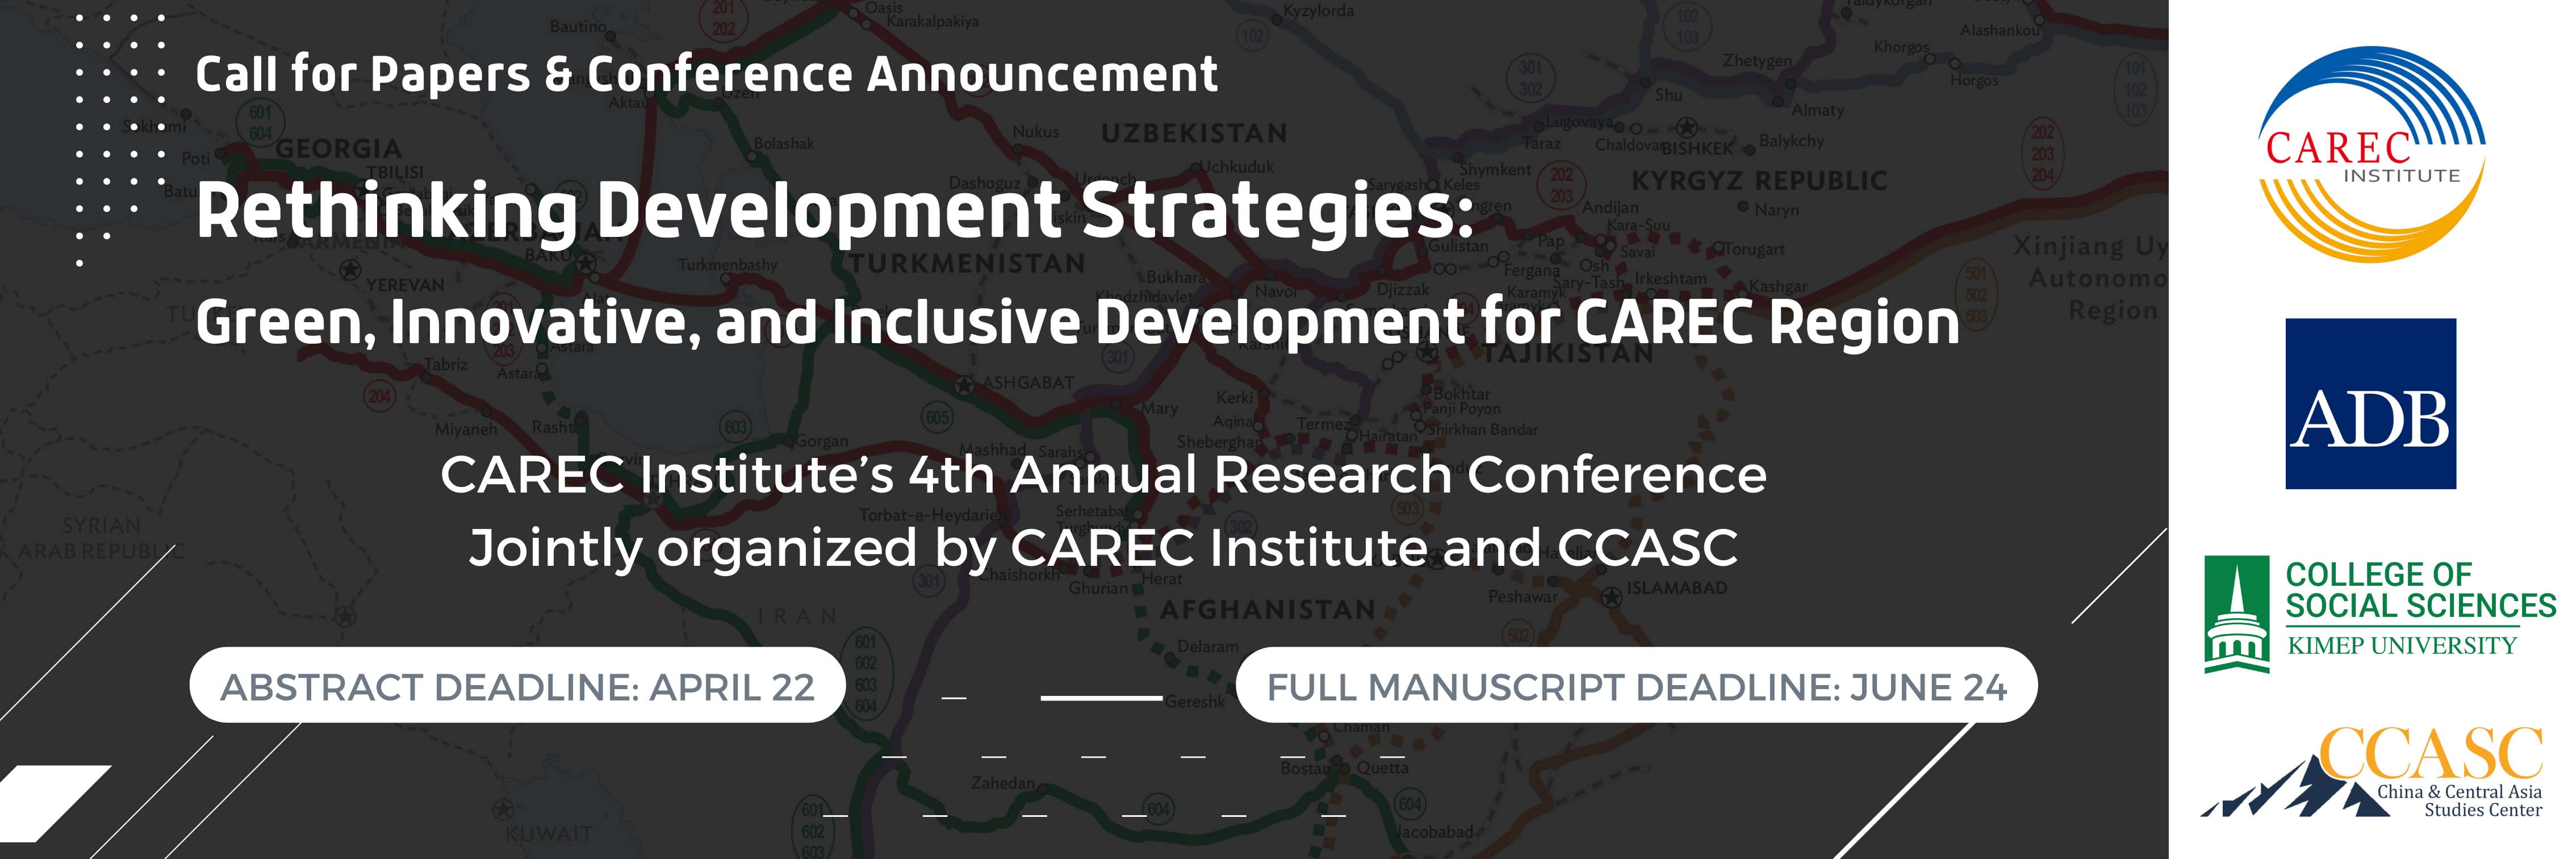 Call for Papers: Rethinking Development Strategies: Green, Innovative, and Inclusive Development for the CAREC region. Deadline Extended: May 13